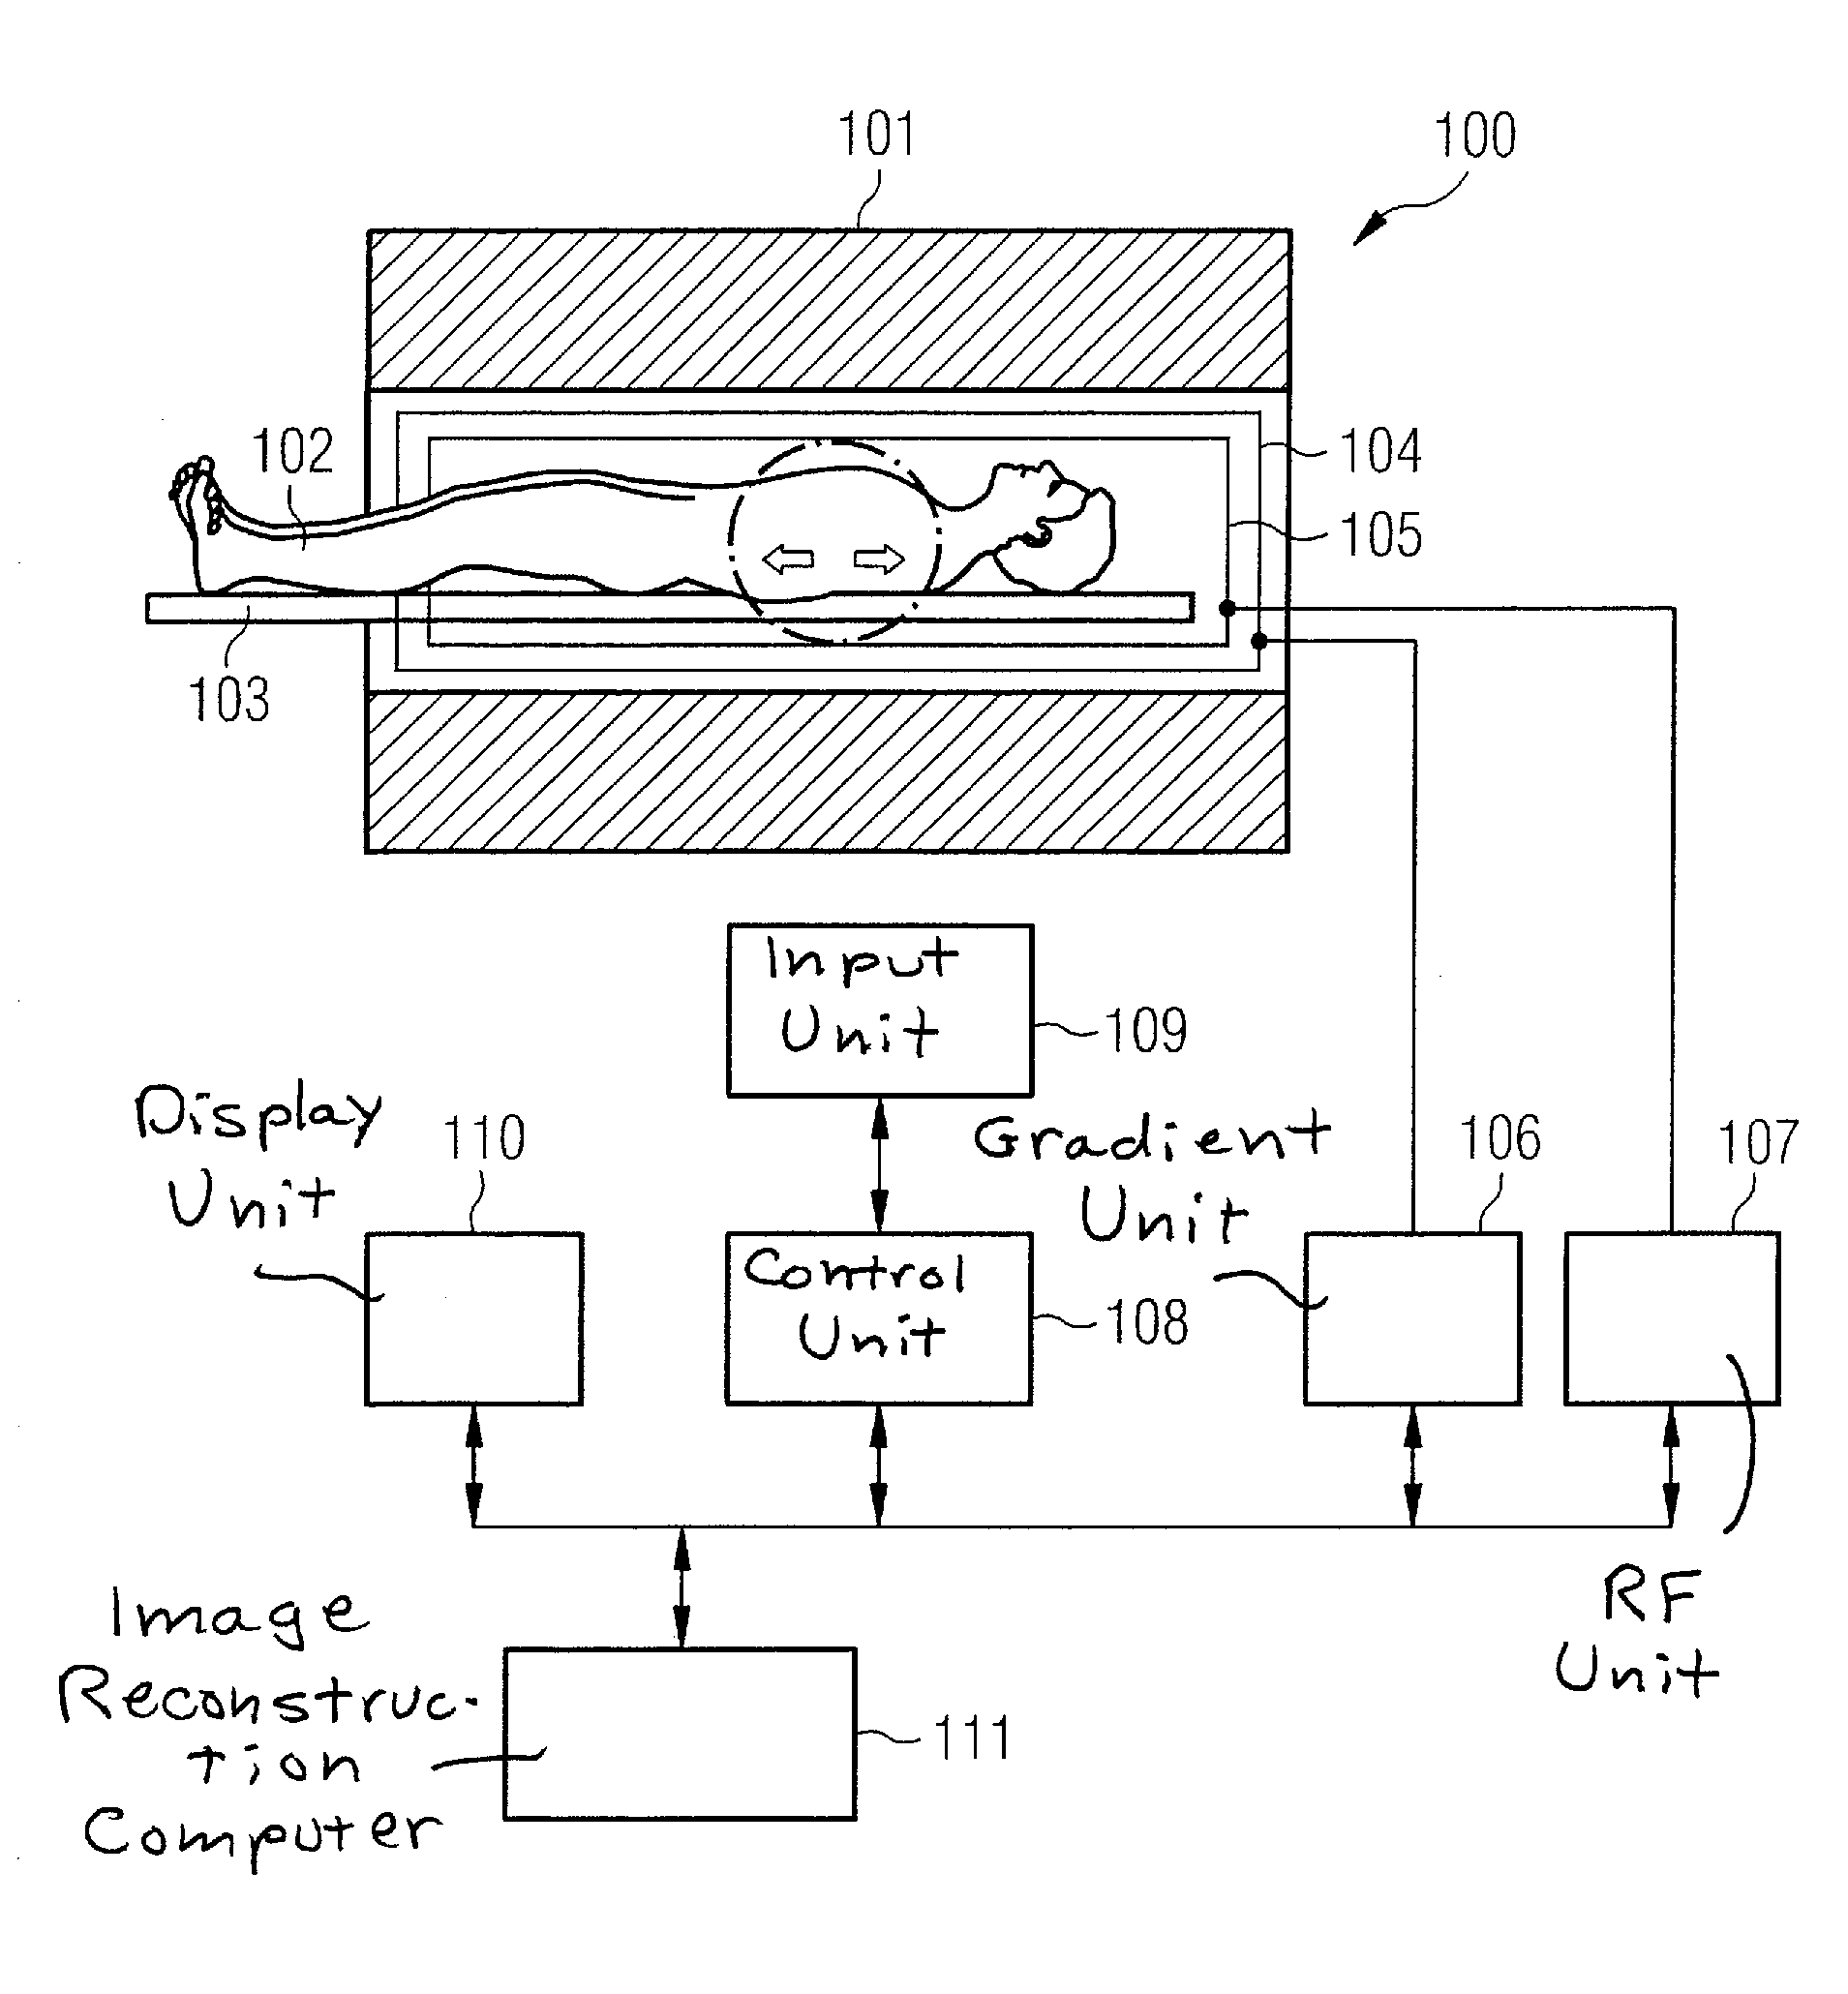 Method and magnetic resonance system to excite nuclear spins in a subject